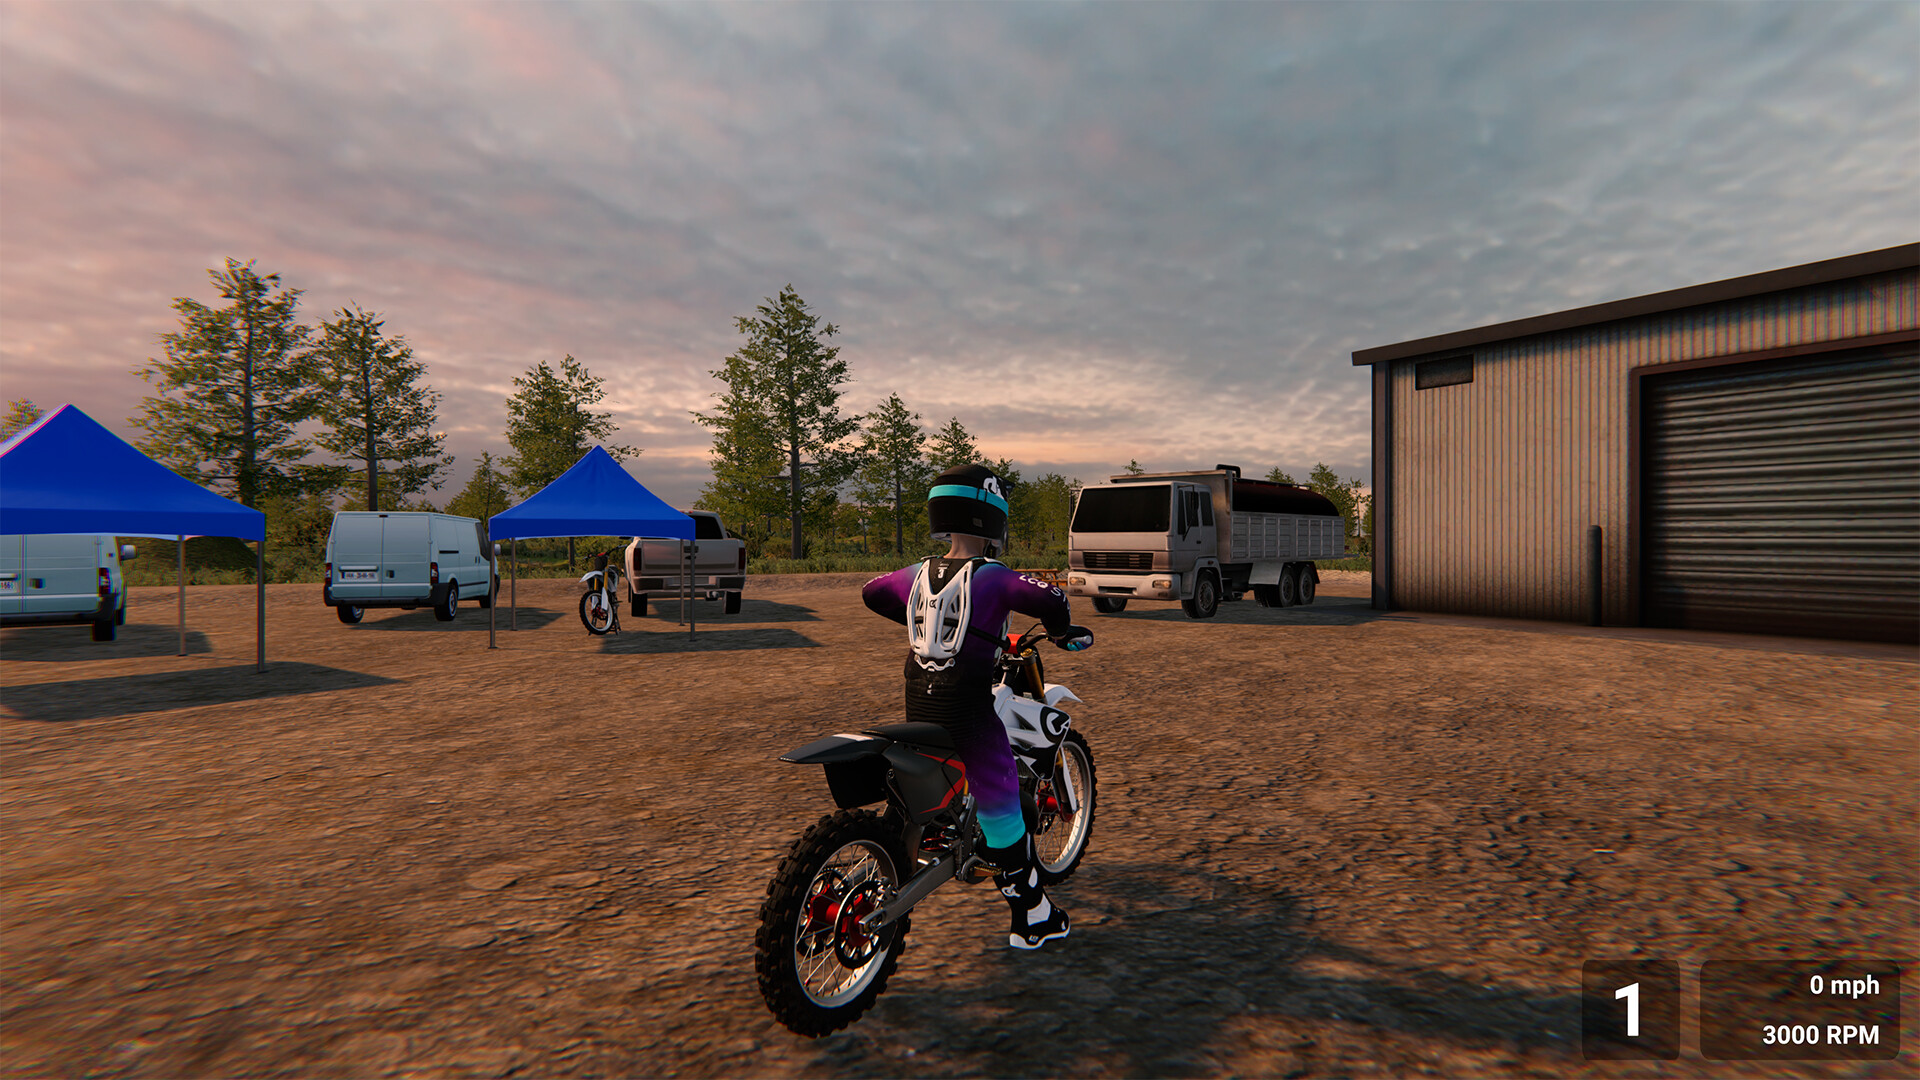 Motocross: Chasing the Dream Free Download